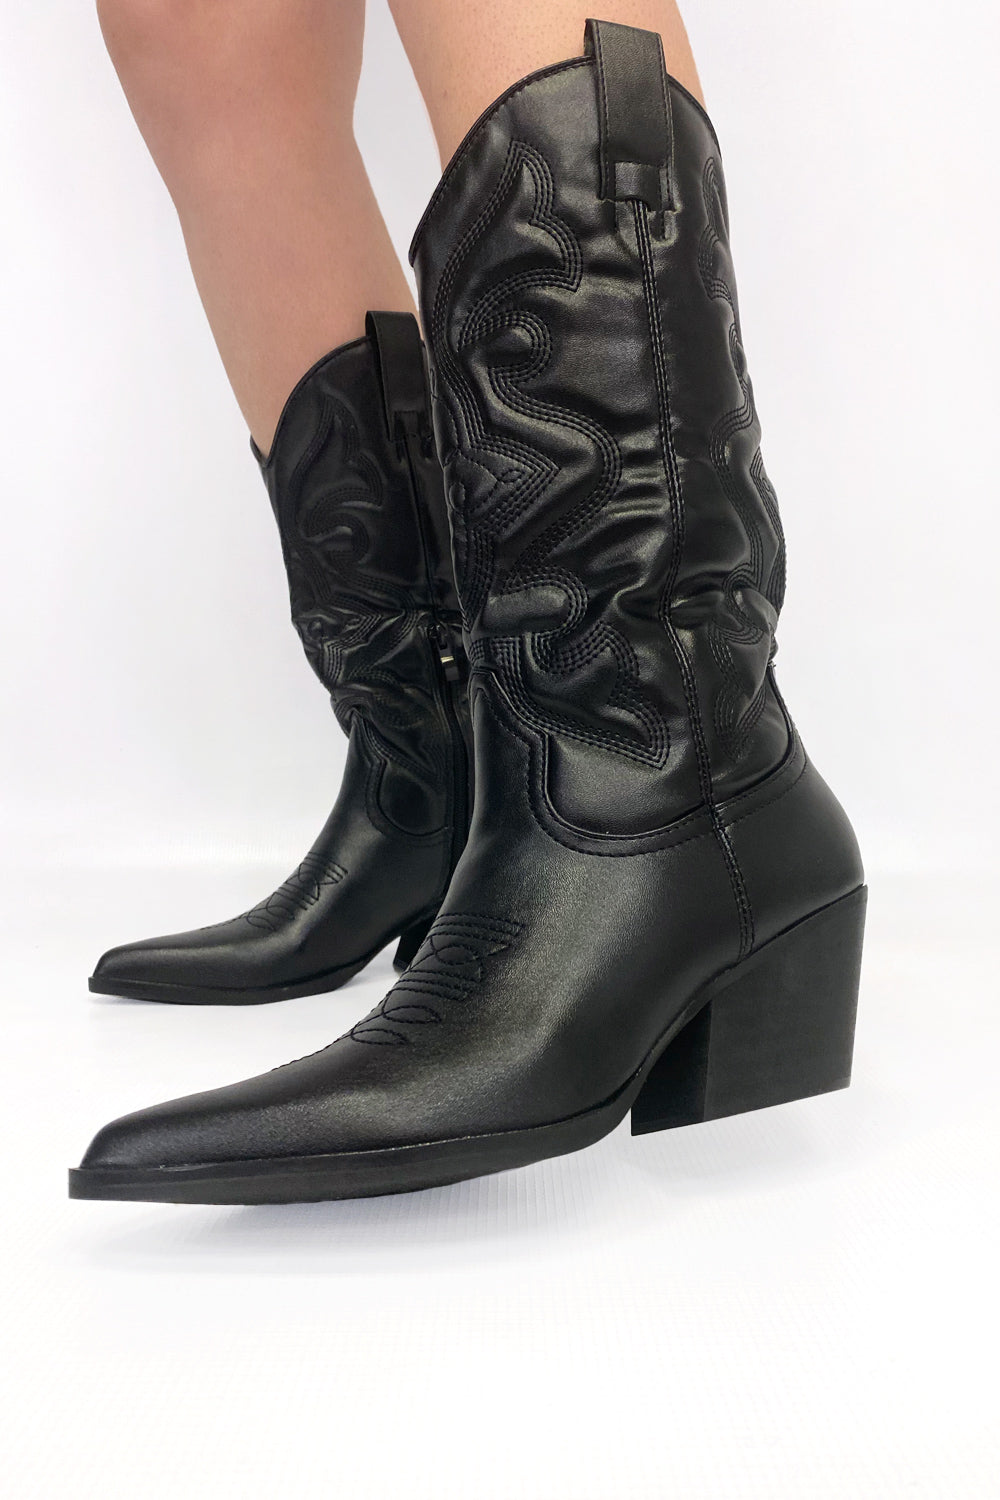 Black Western Embroidered Cowboy Boots